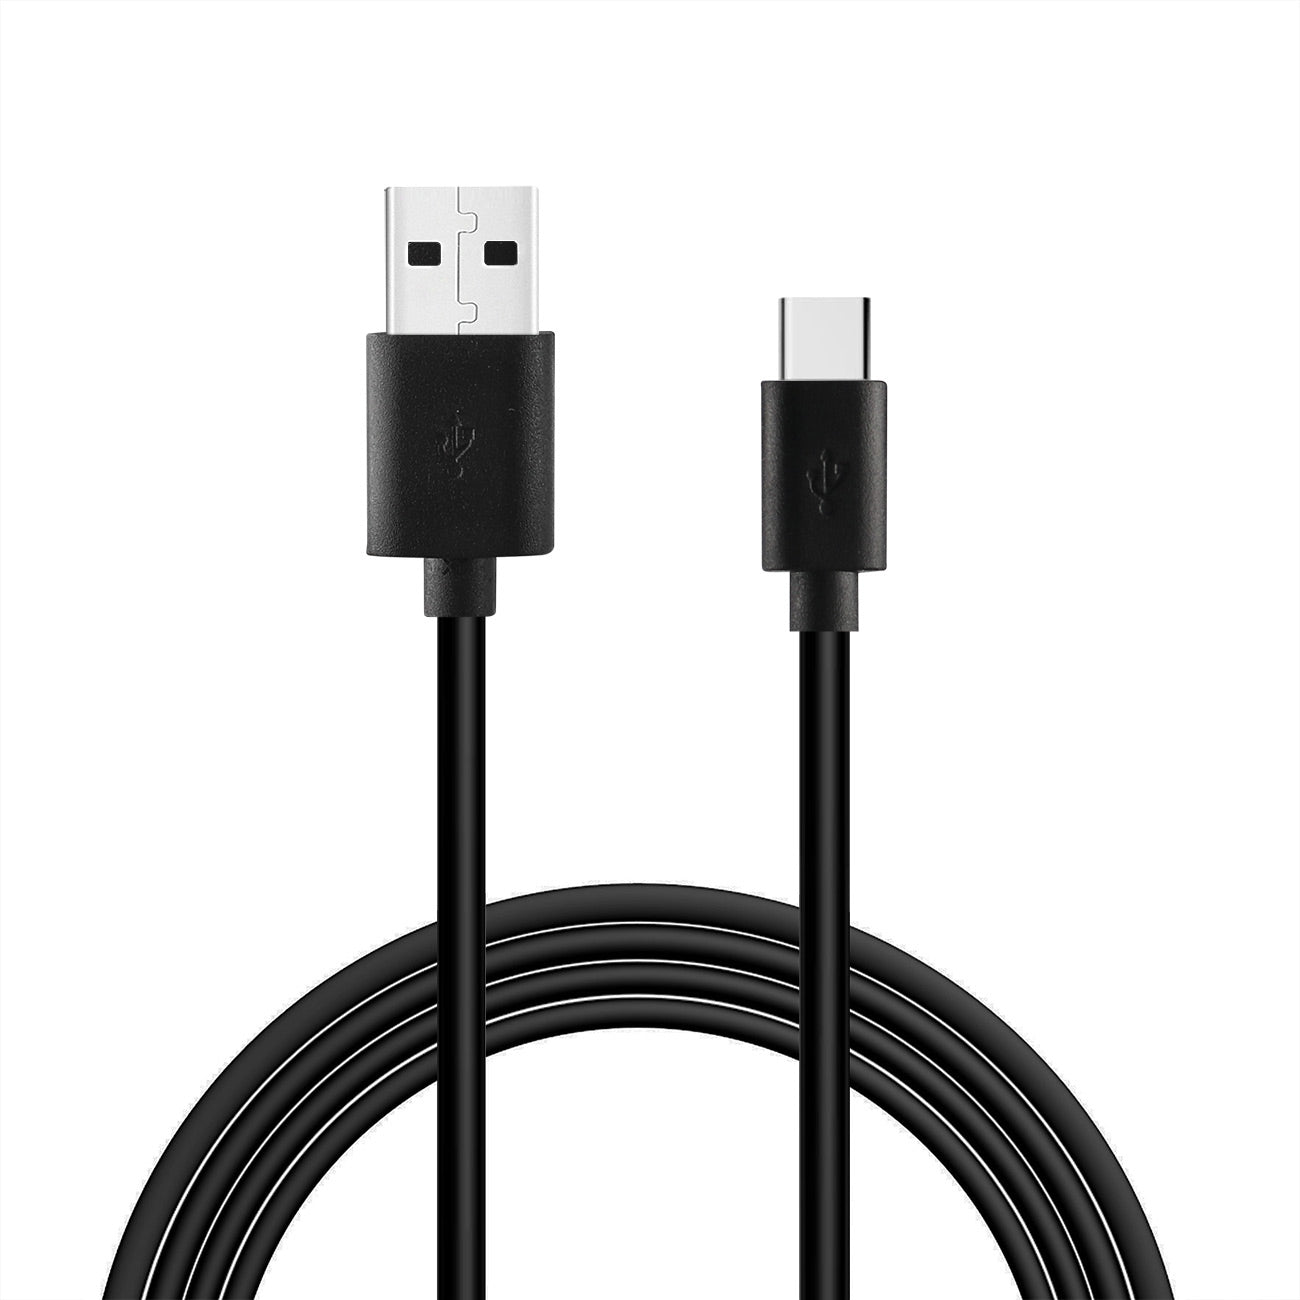 3.3FT PVC Material Type C USB 2.0 Data Cable In Black And Simple Packaging